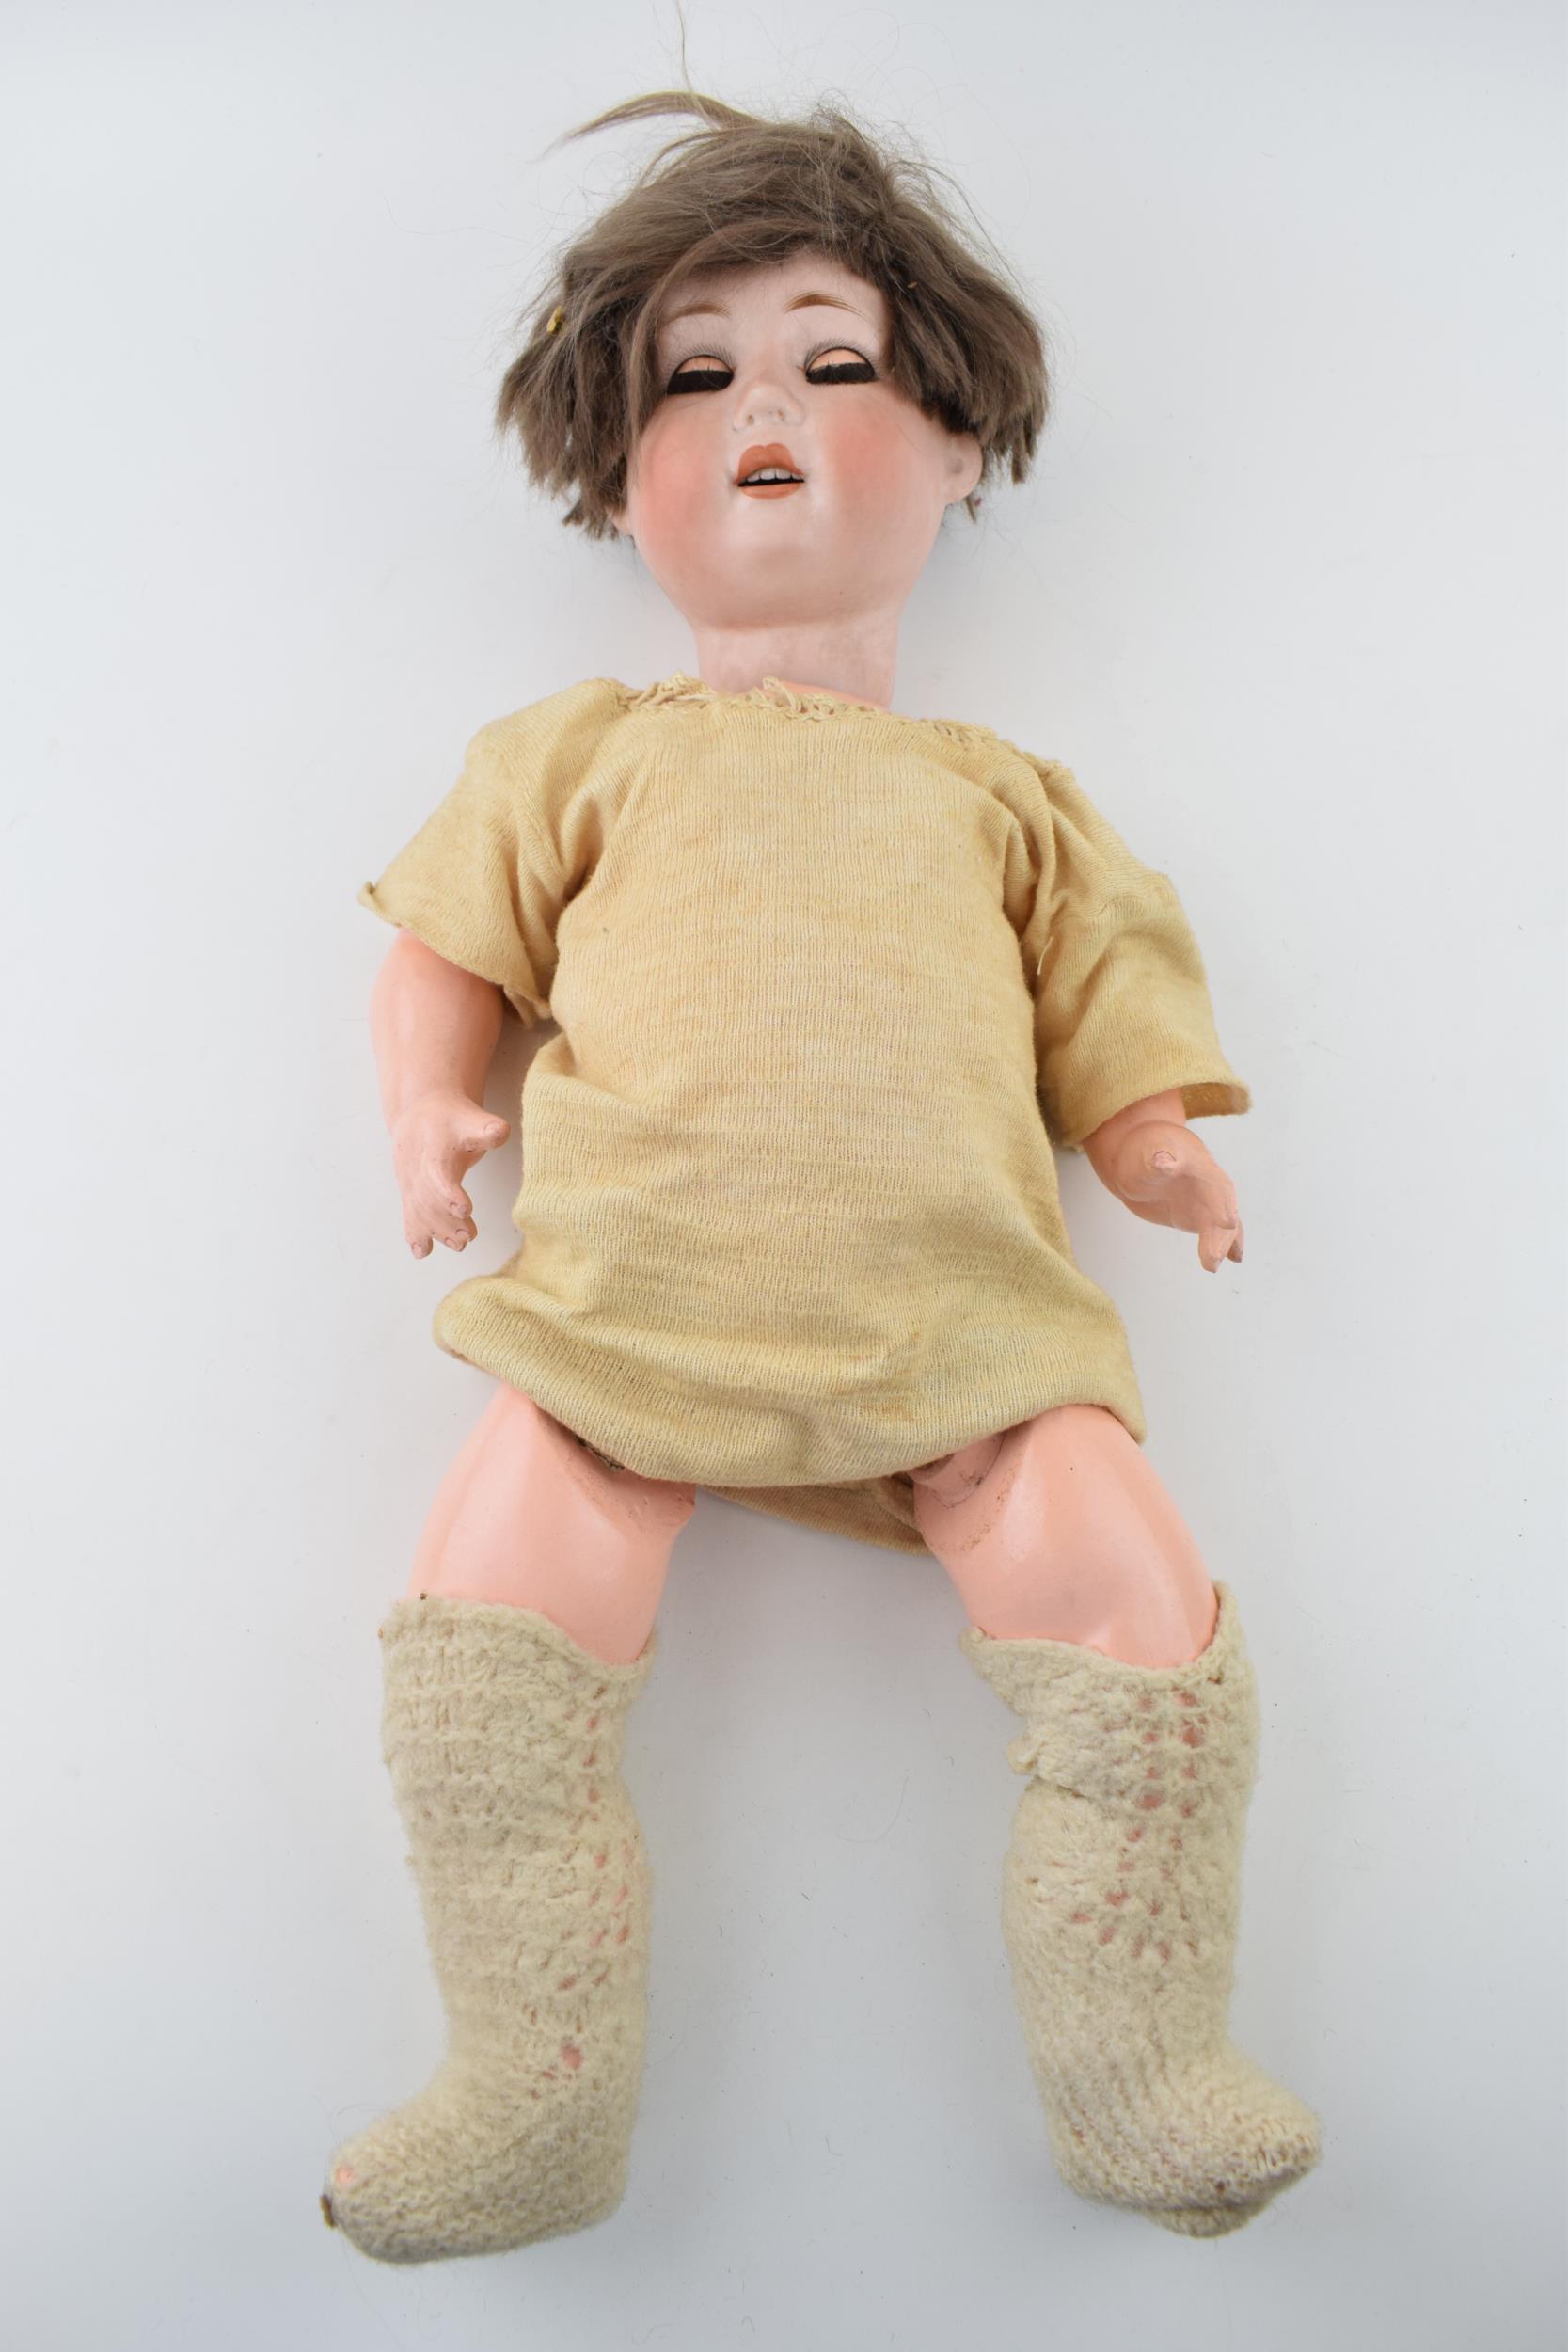 Bisque head doll marked WG possibly William Gobel, Head good requires re-stringing. Height 54cm.